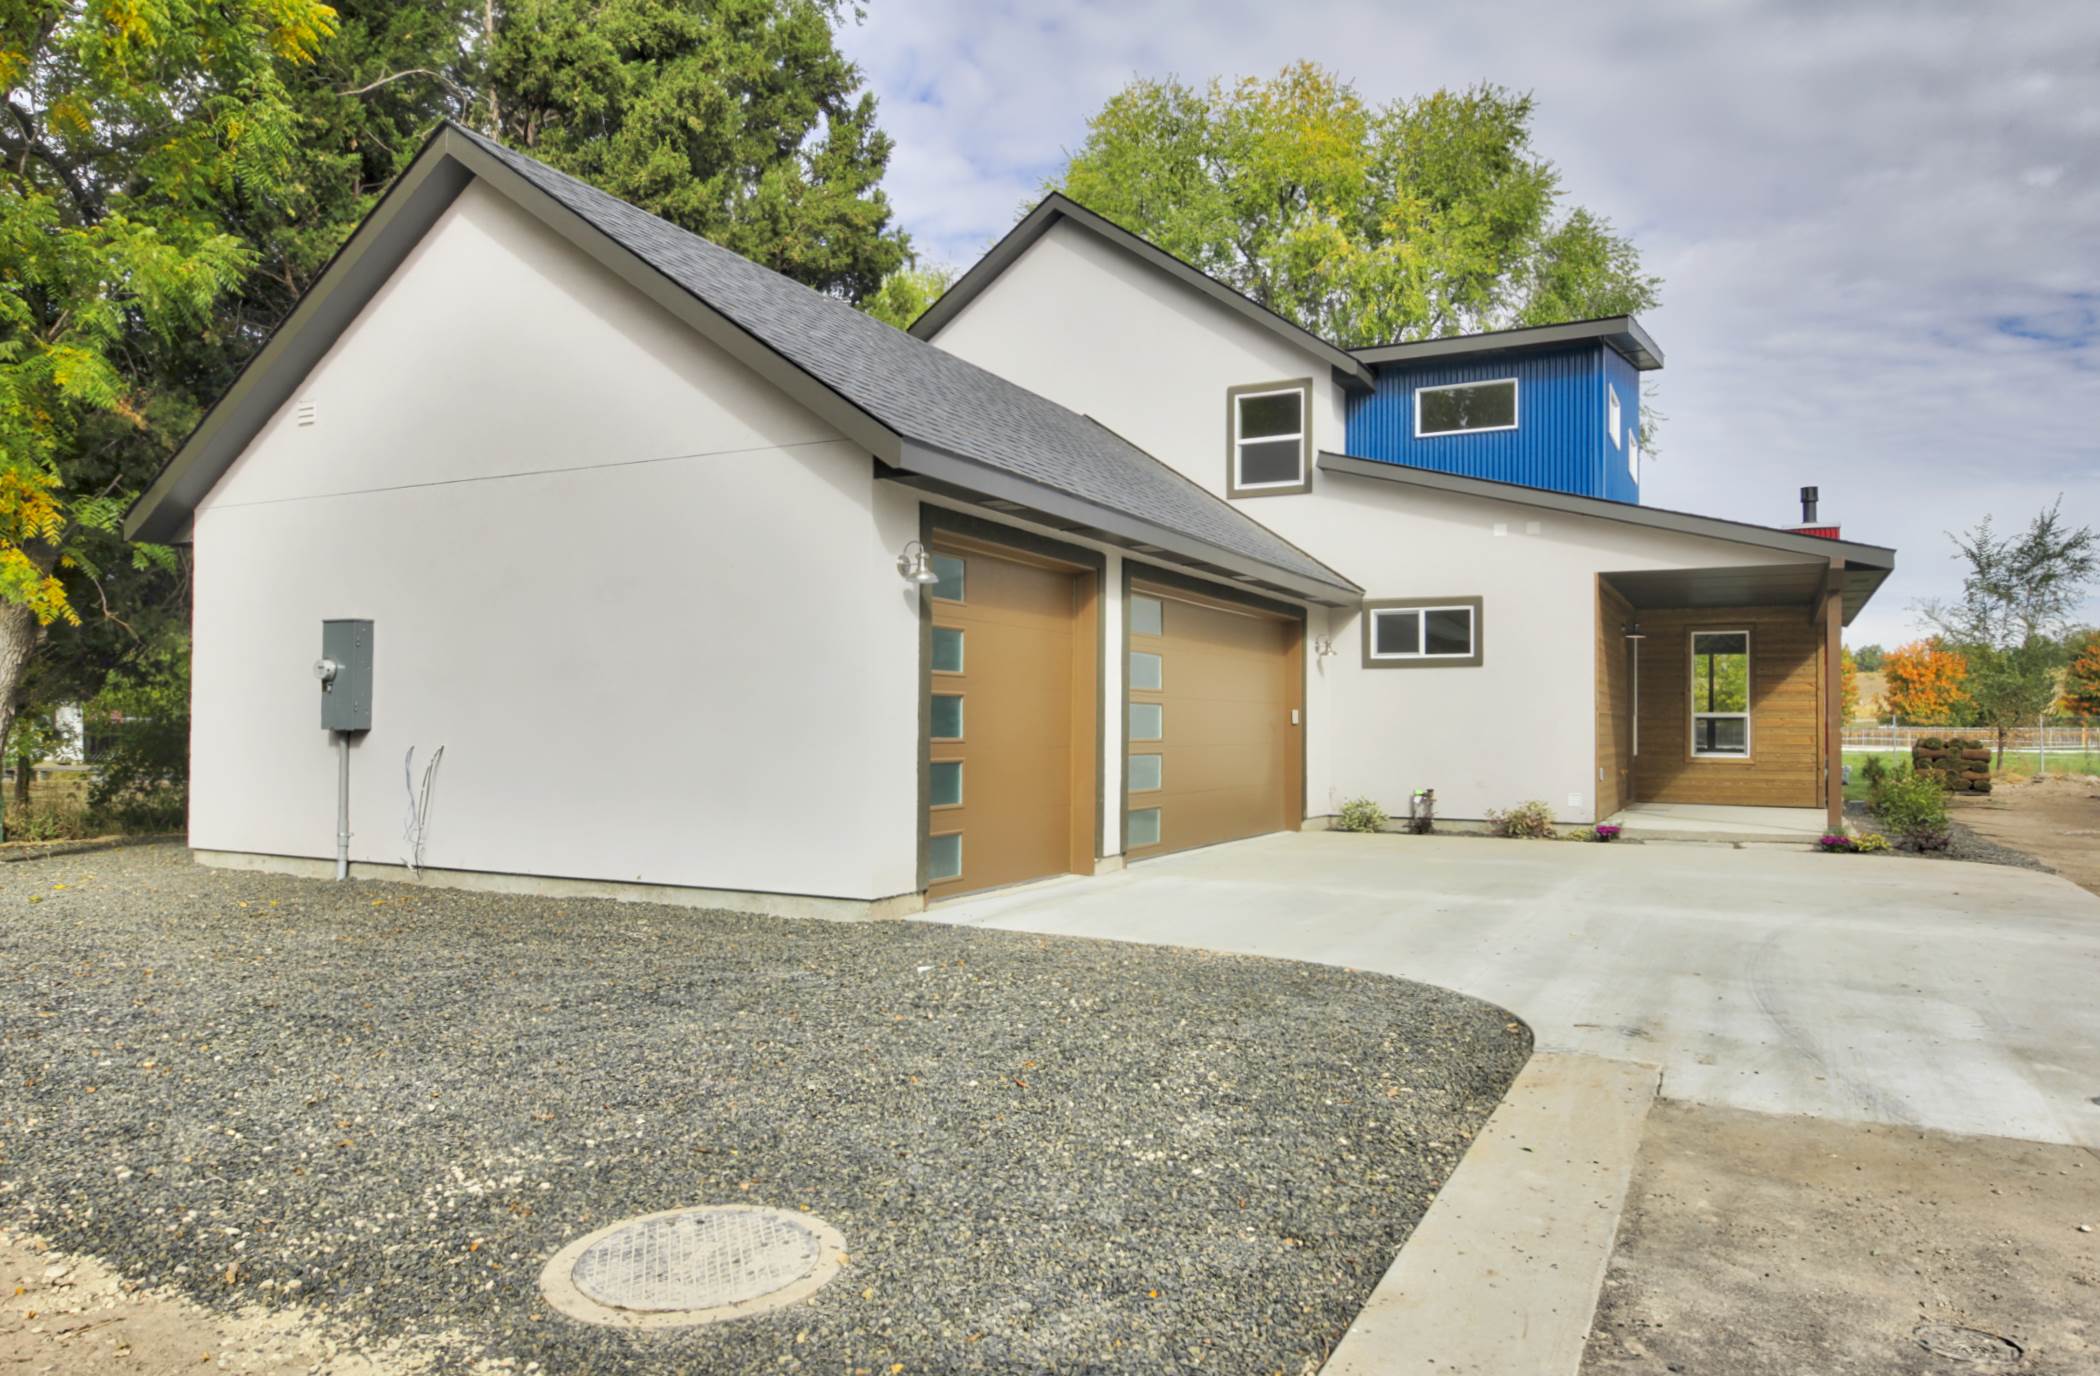 10290 West Arnold Rd, Boise, ID 83714